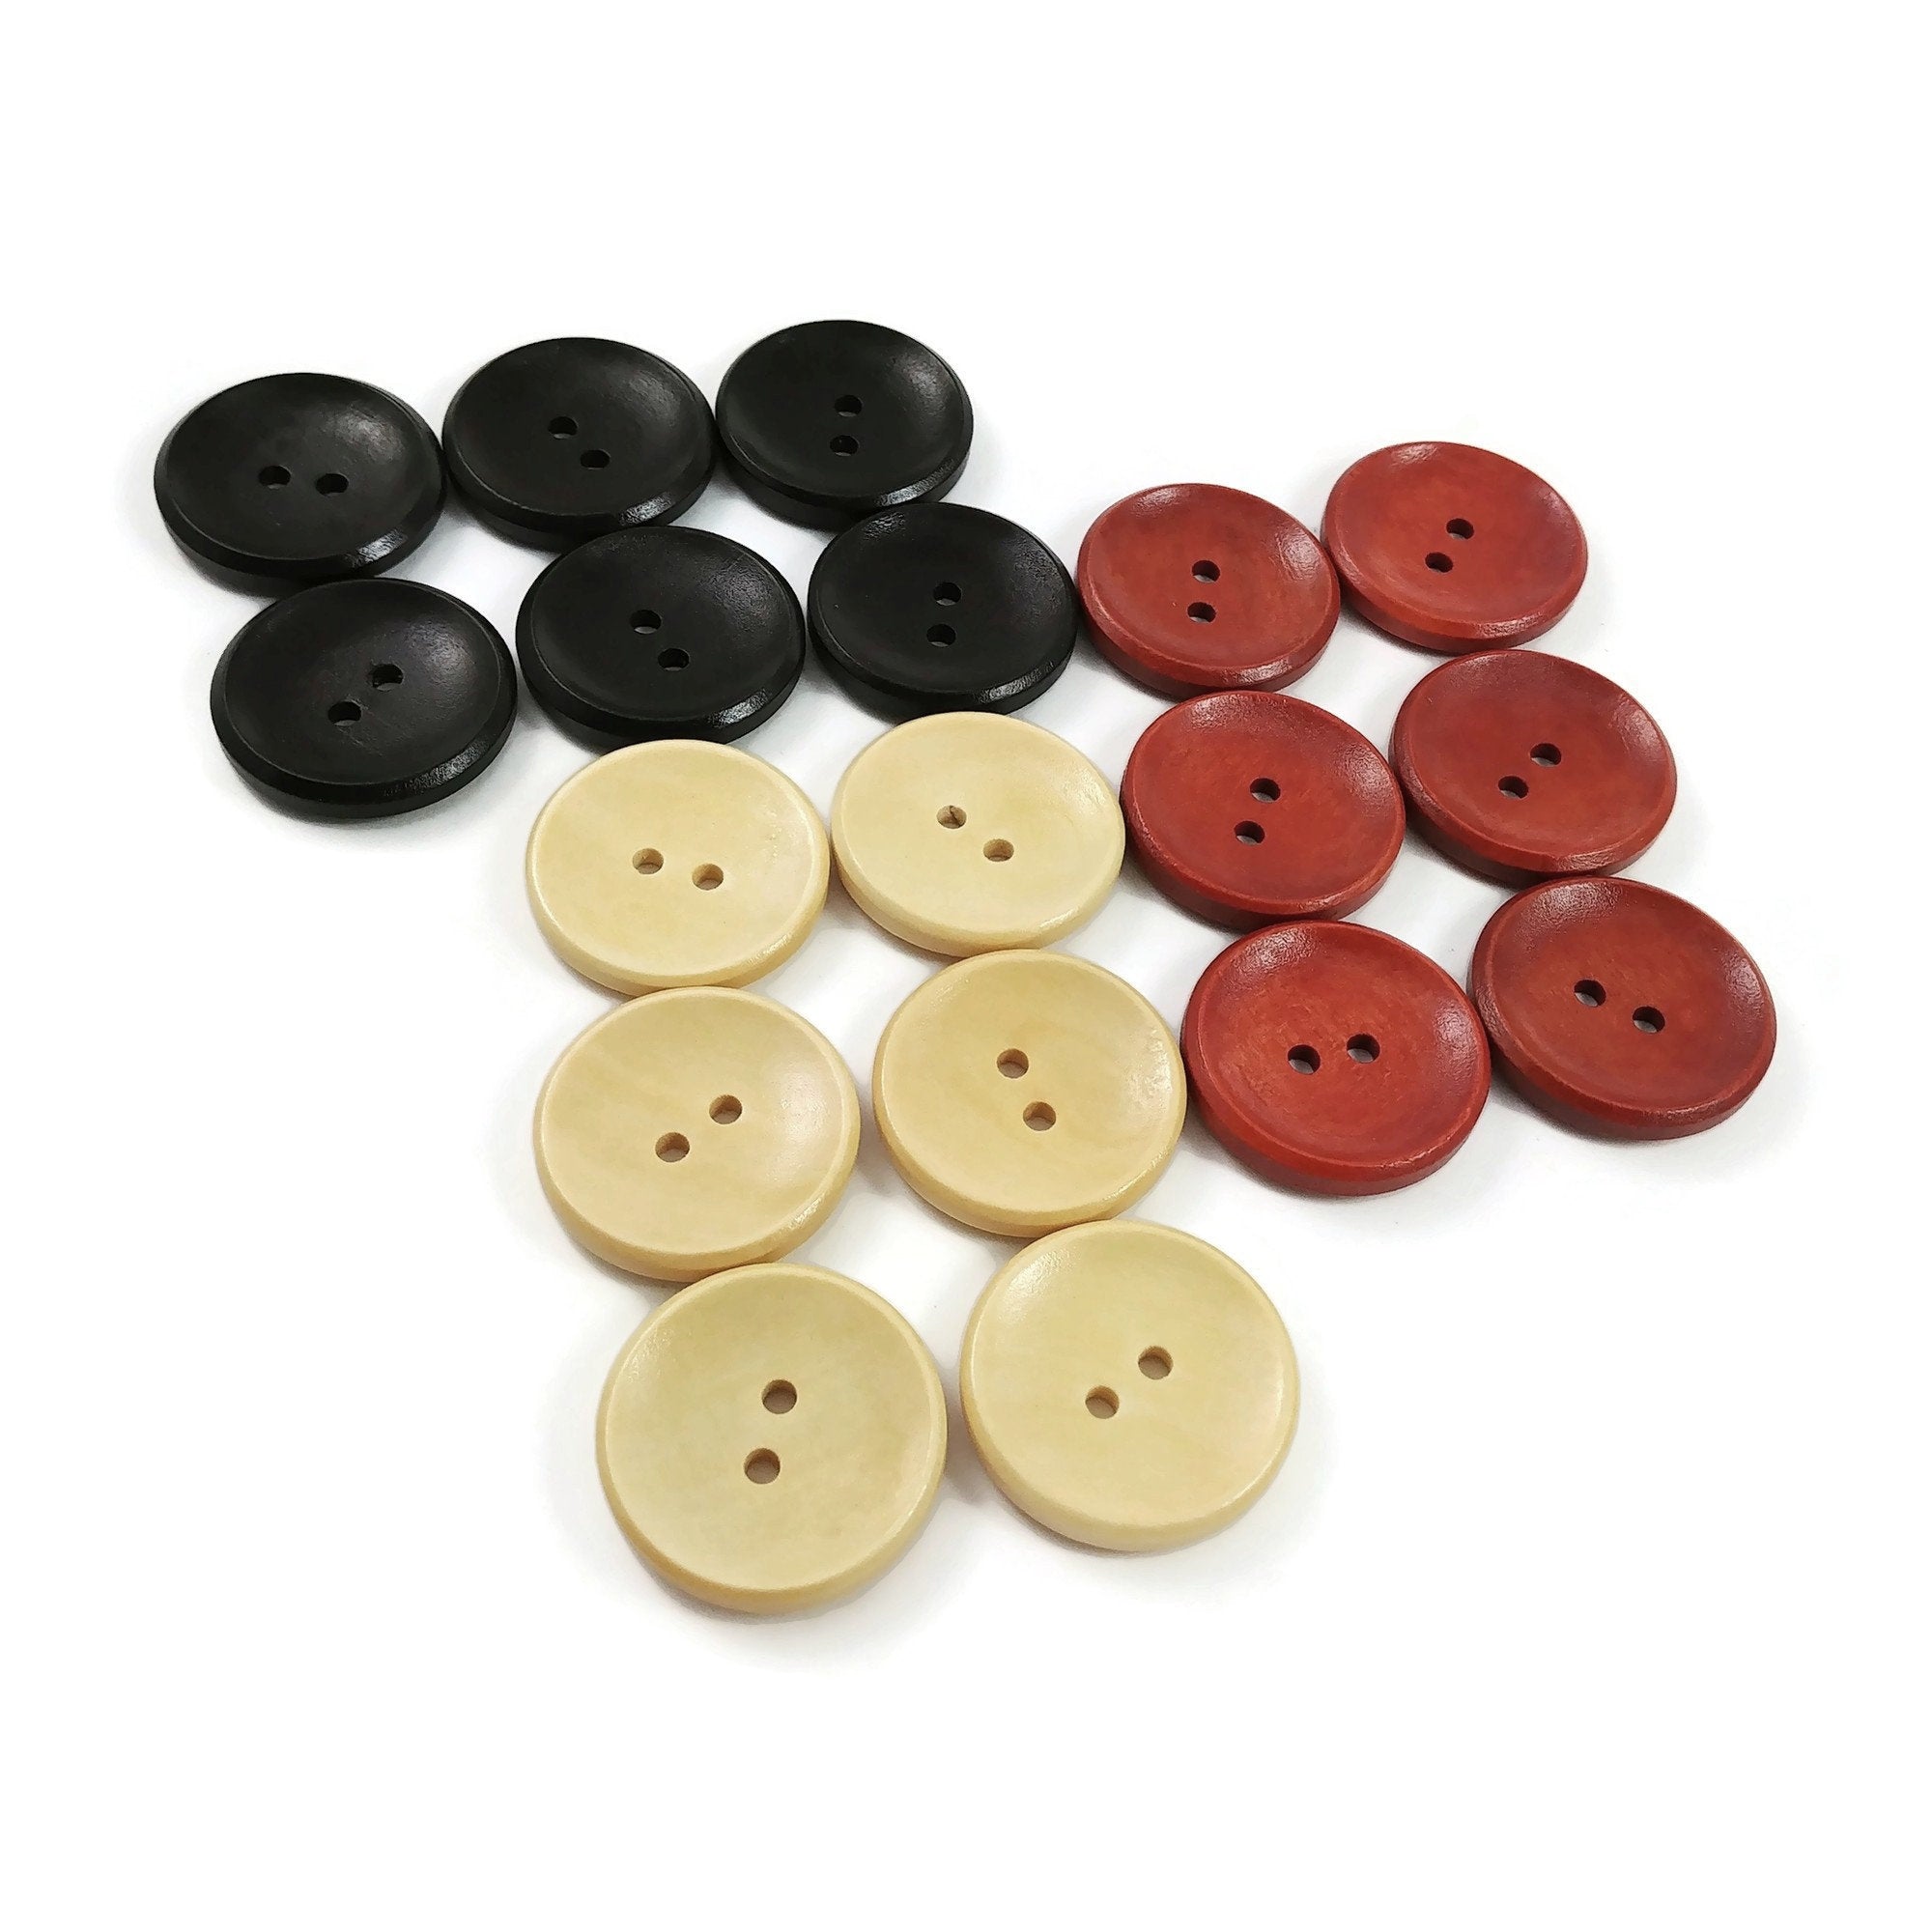 Vintage Craft Wooden Buttons  Sewing Supplies Wood Button